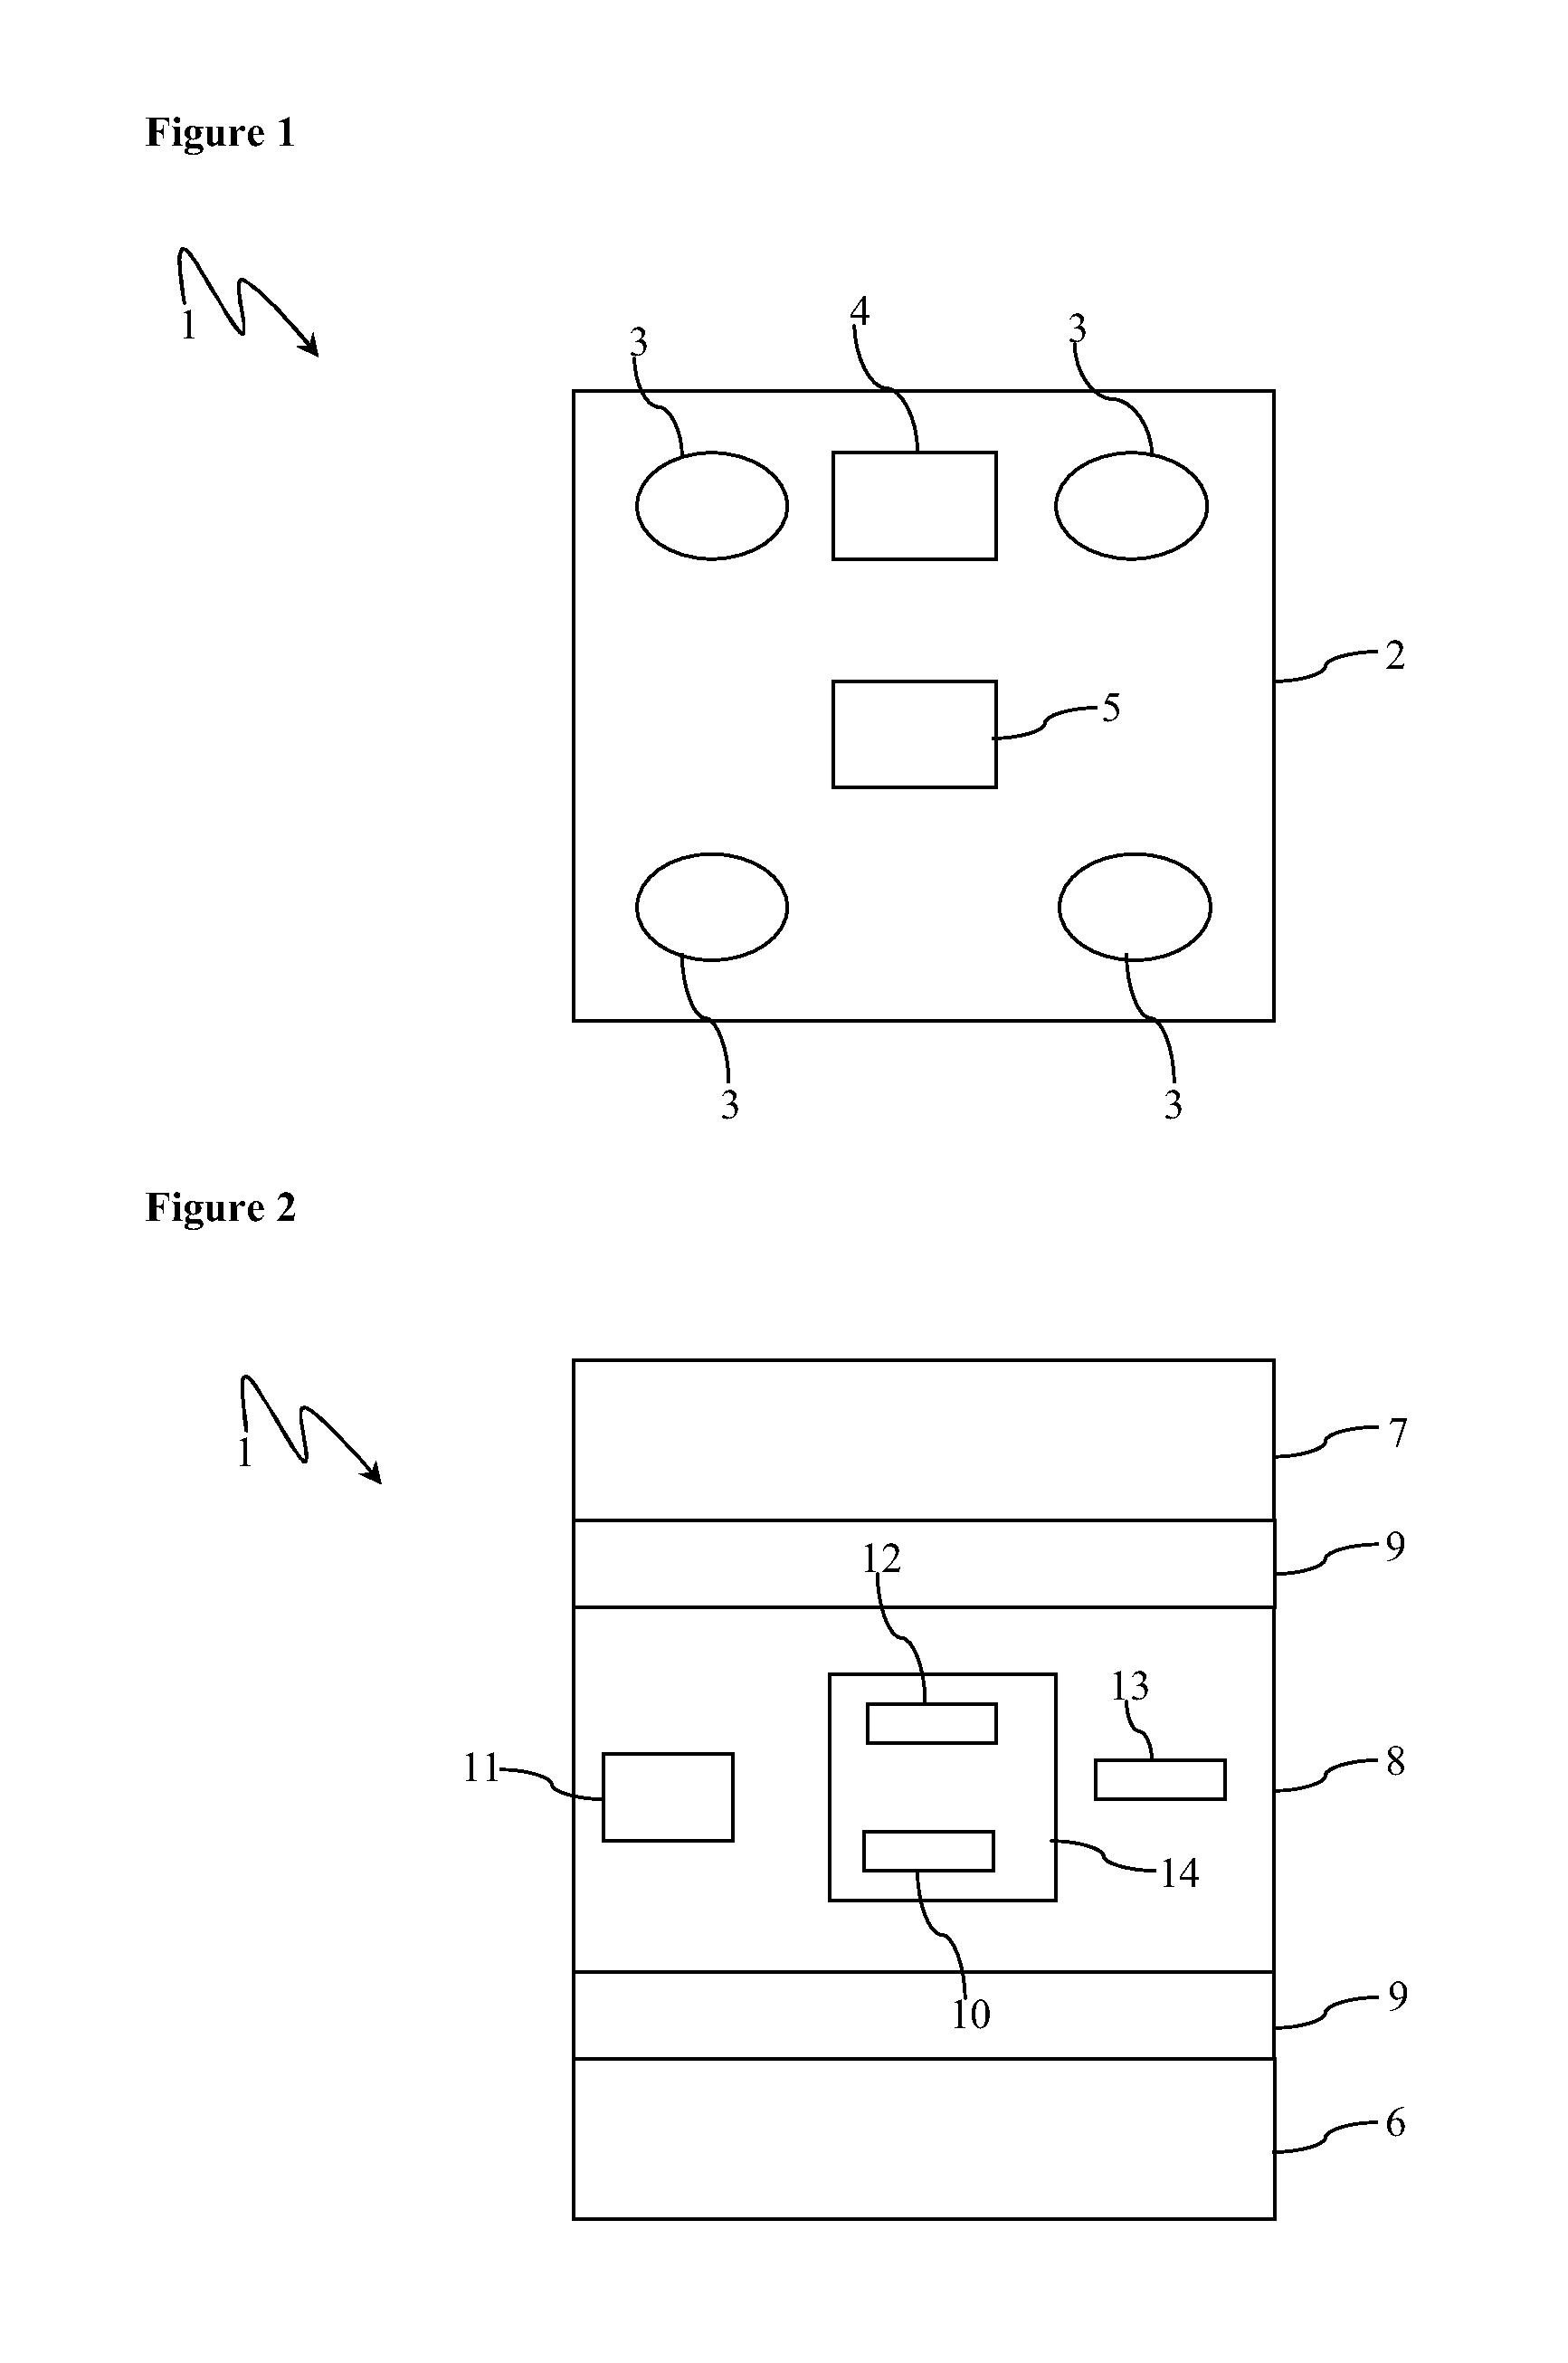 Remote Patient Management Device and Method